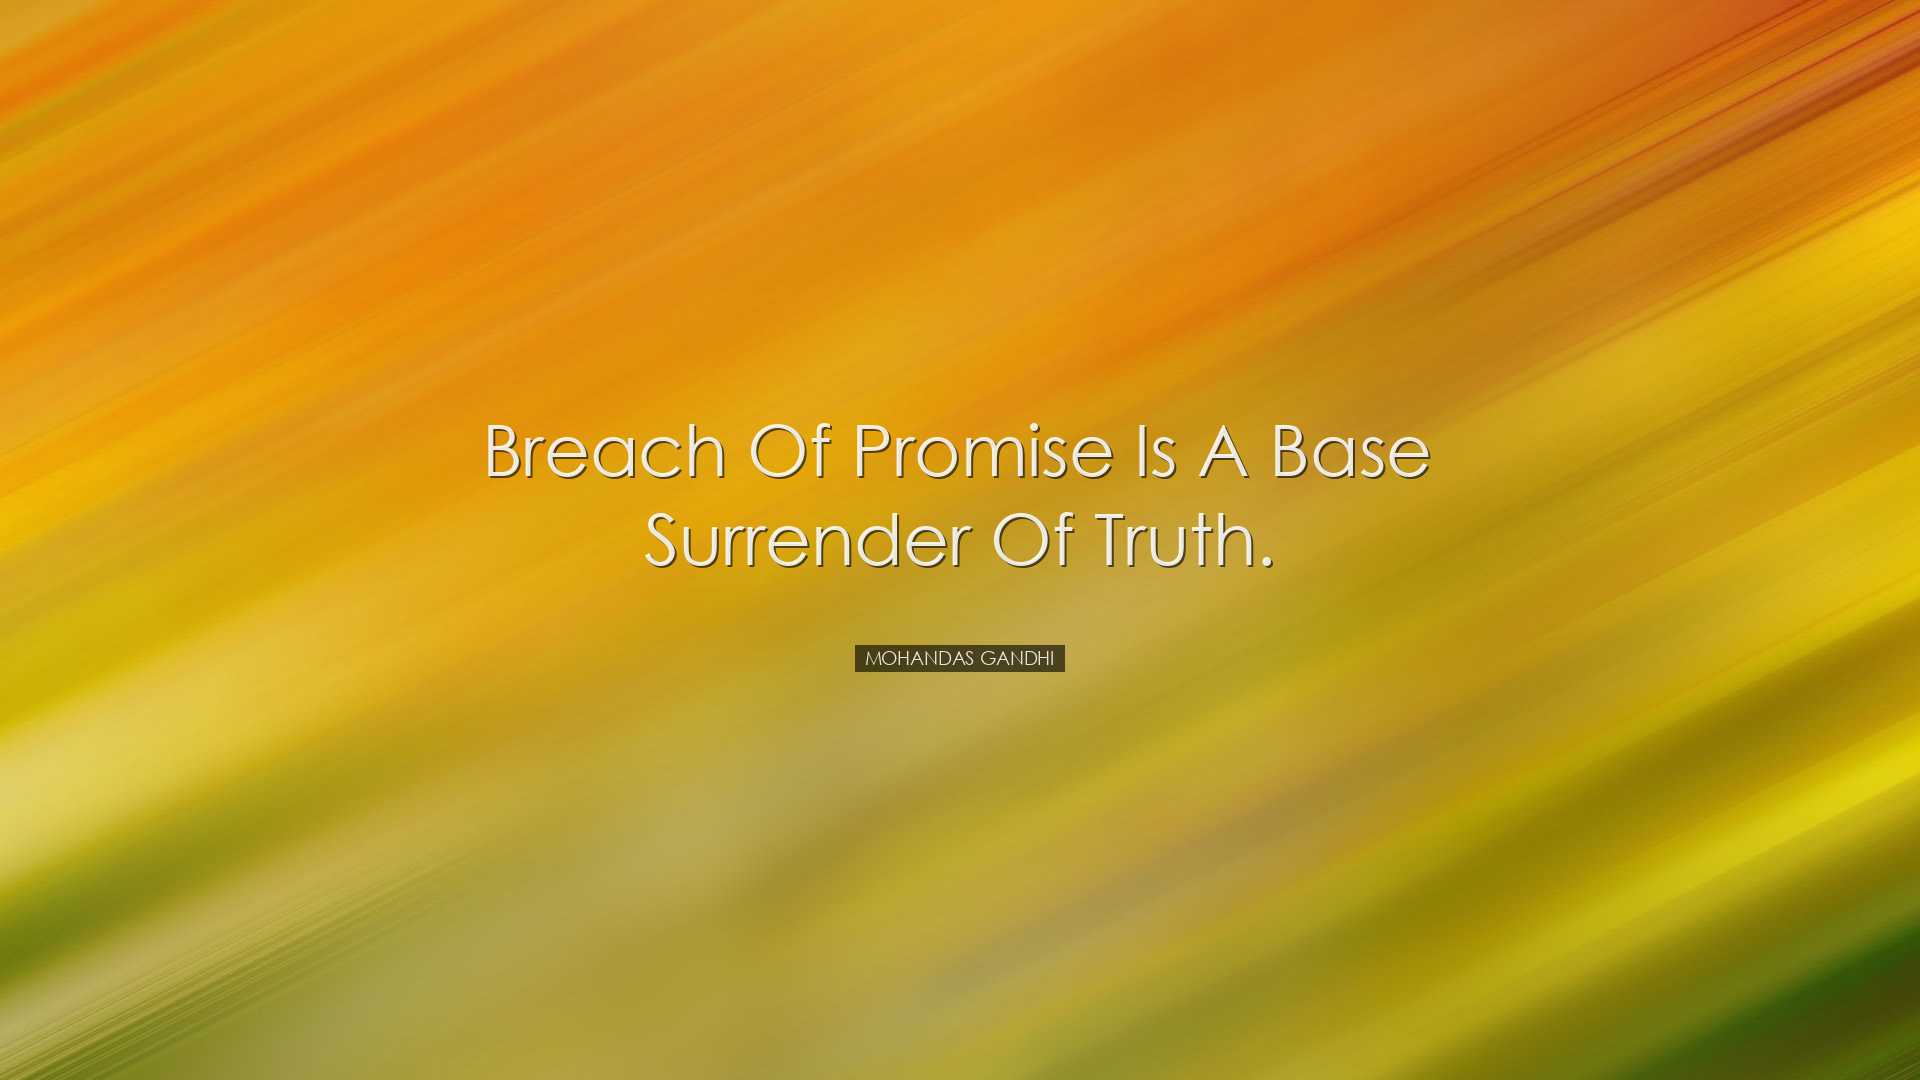 Breach of promise is a base surrender of truth. - Mohandas Gandhi